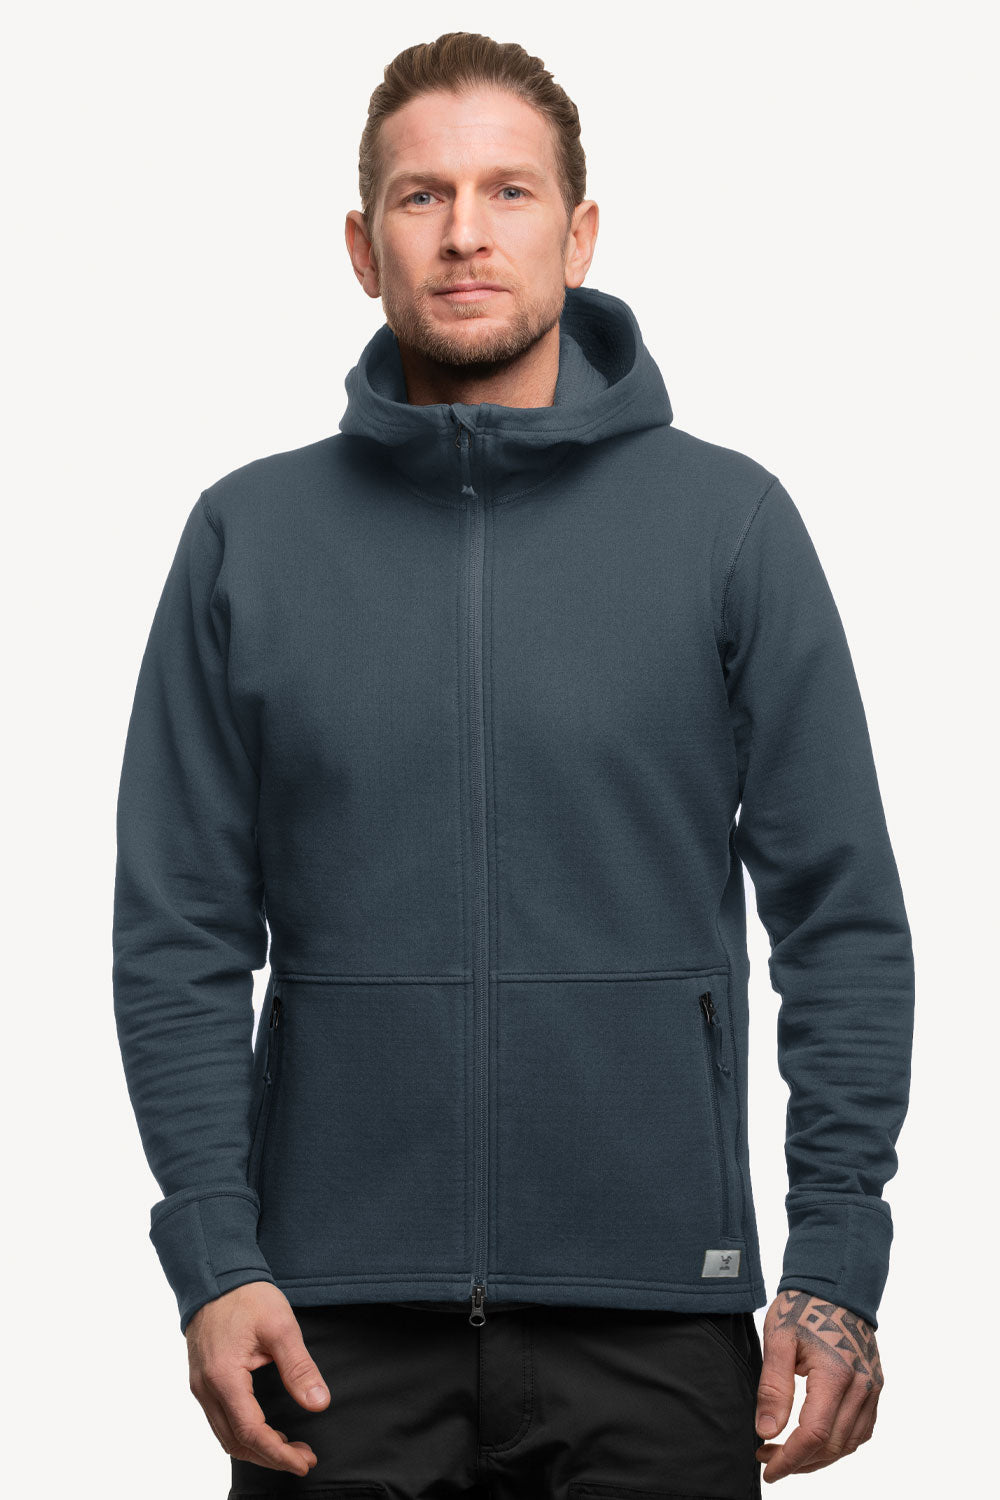 All weather technical hoodie, herr.